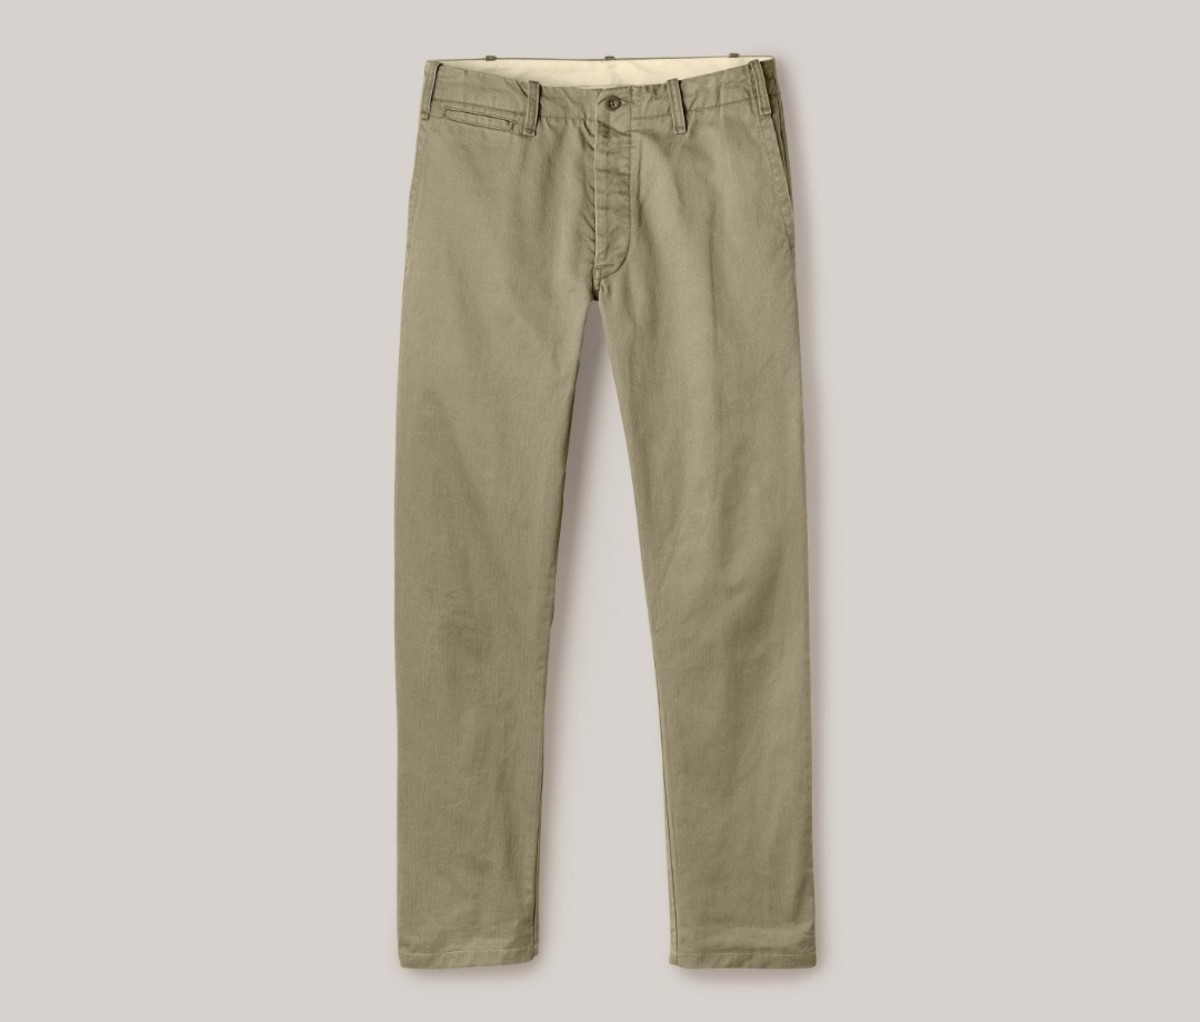 Buy Khaki Sport Fit Stretch Chinos Online at Muftijeans